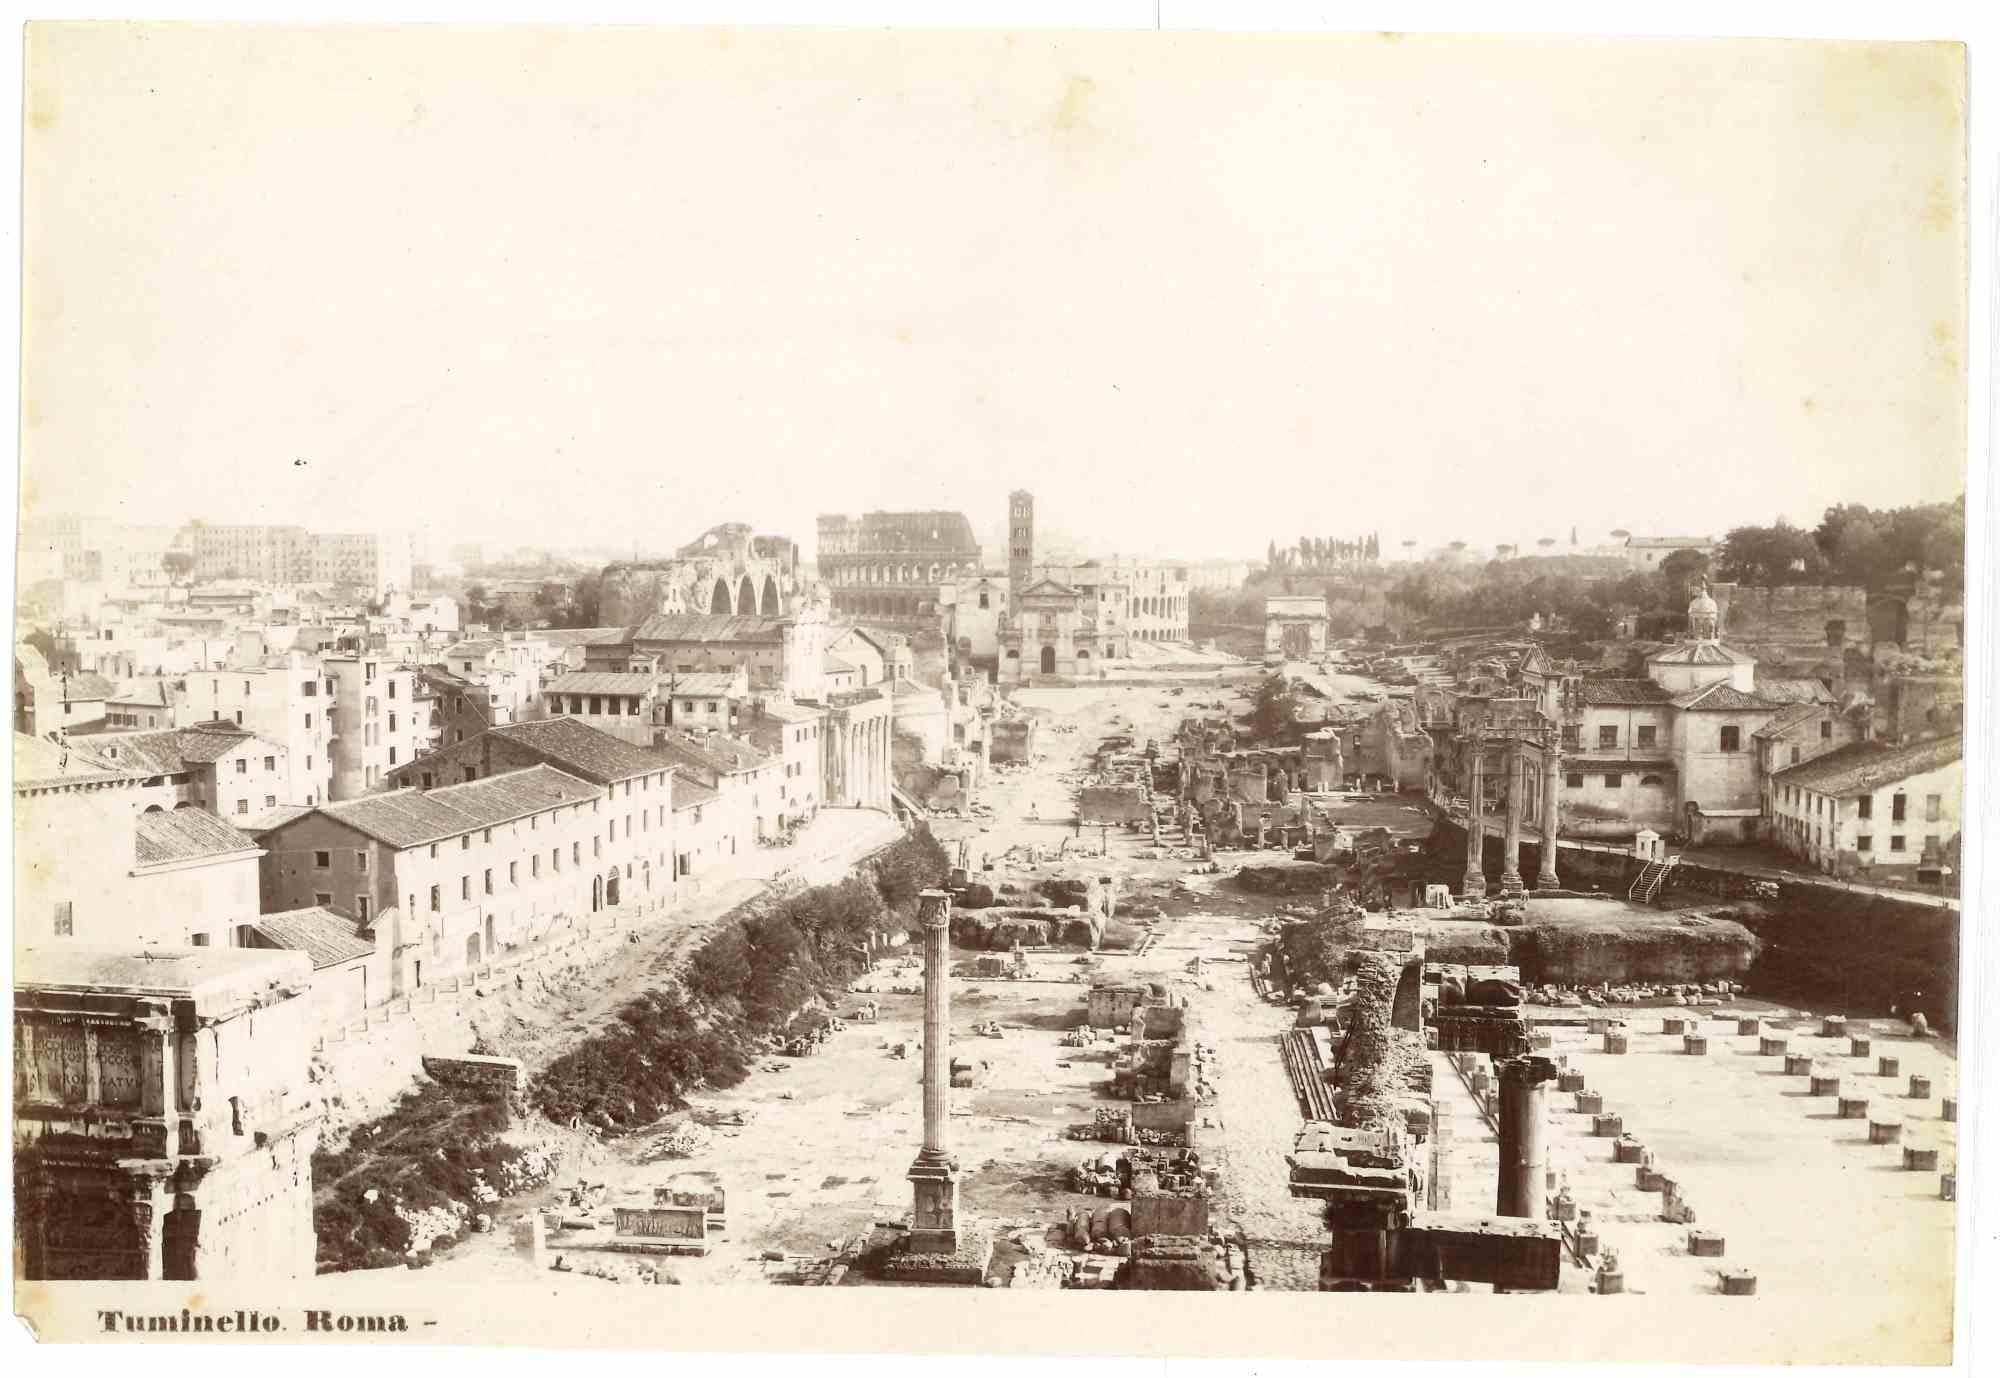 Roman Imperial Forums is a vintage photograph in salt silver realized by Ludovico Tuminello in the early 20th Century.

Good conditions except for some foxing.